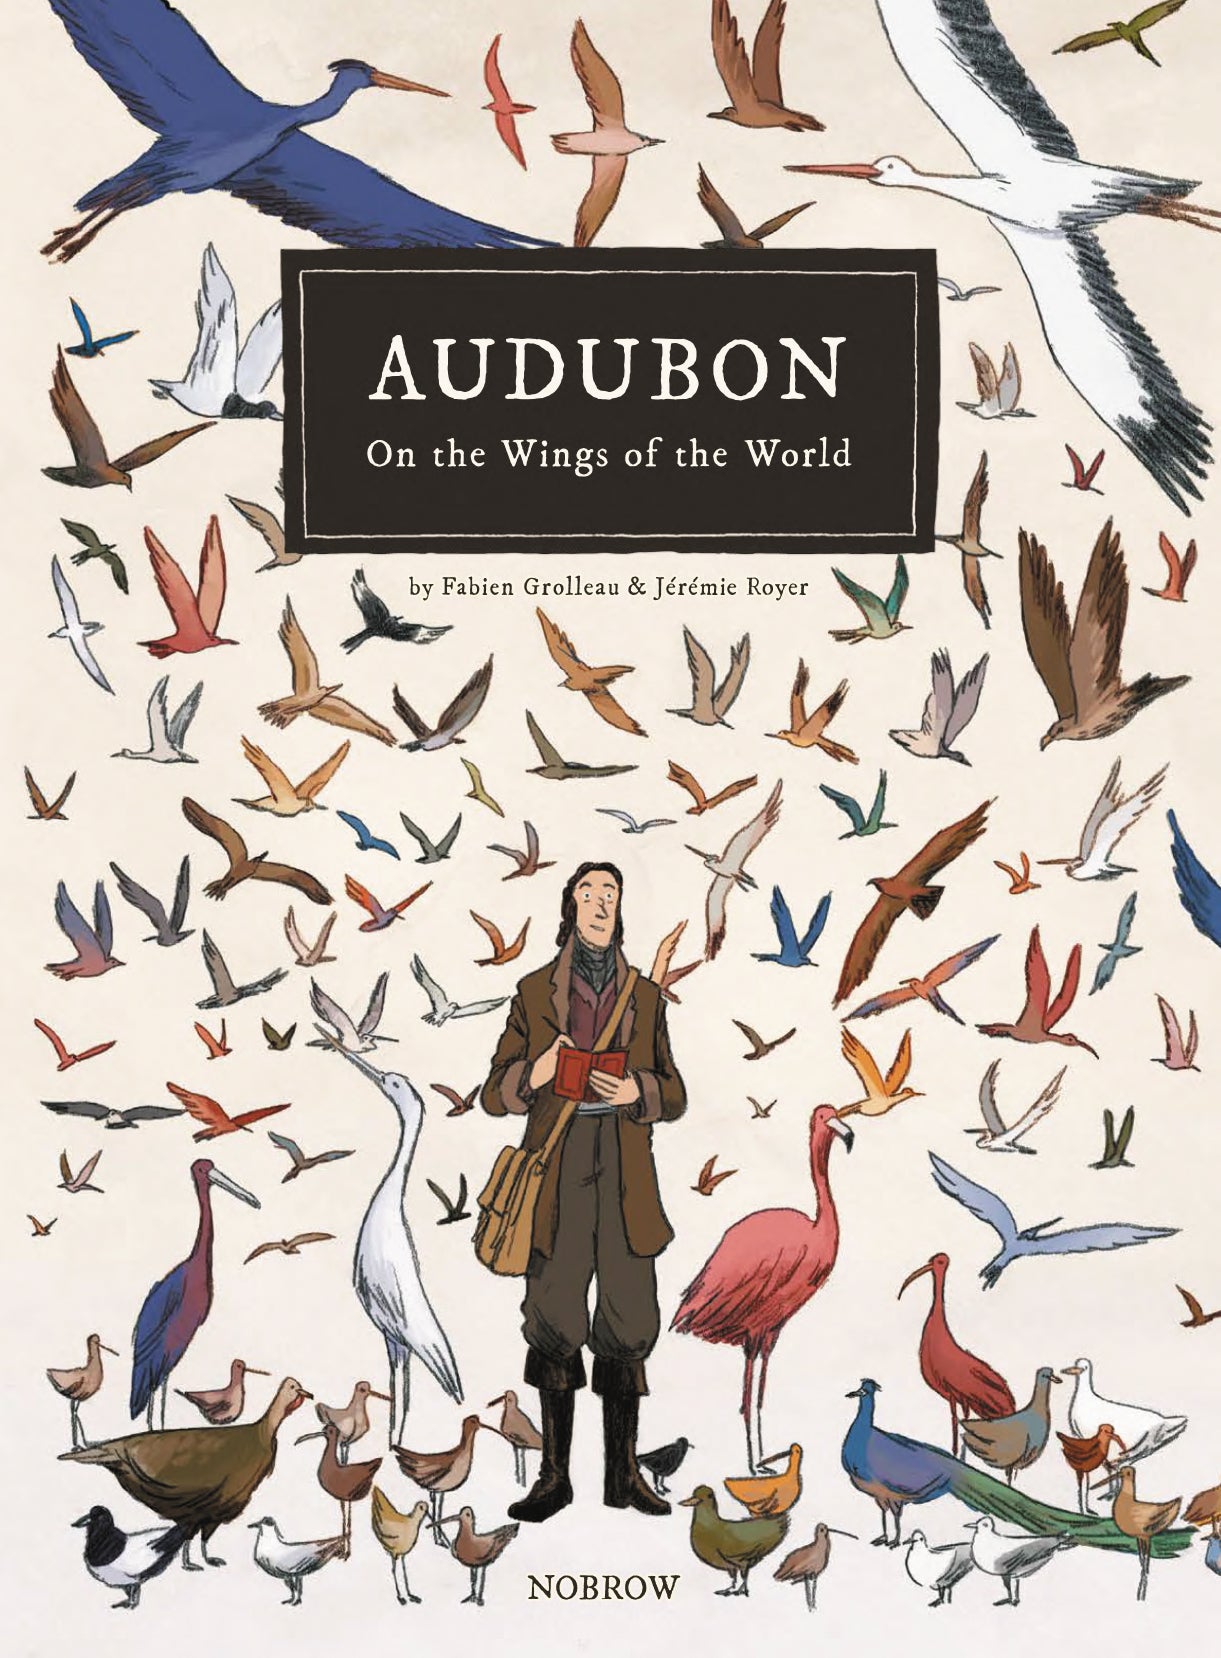 Audubon On The Wings of the World